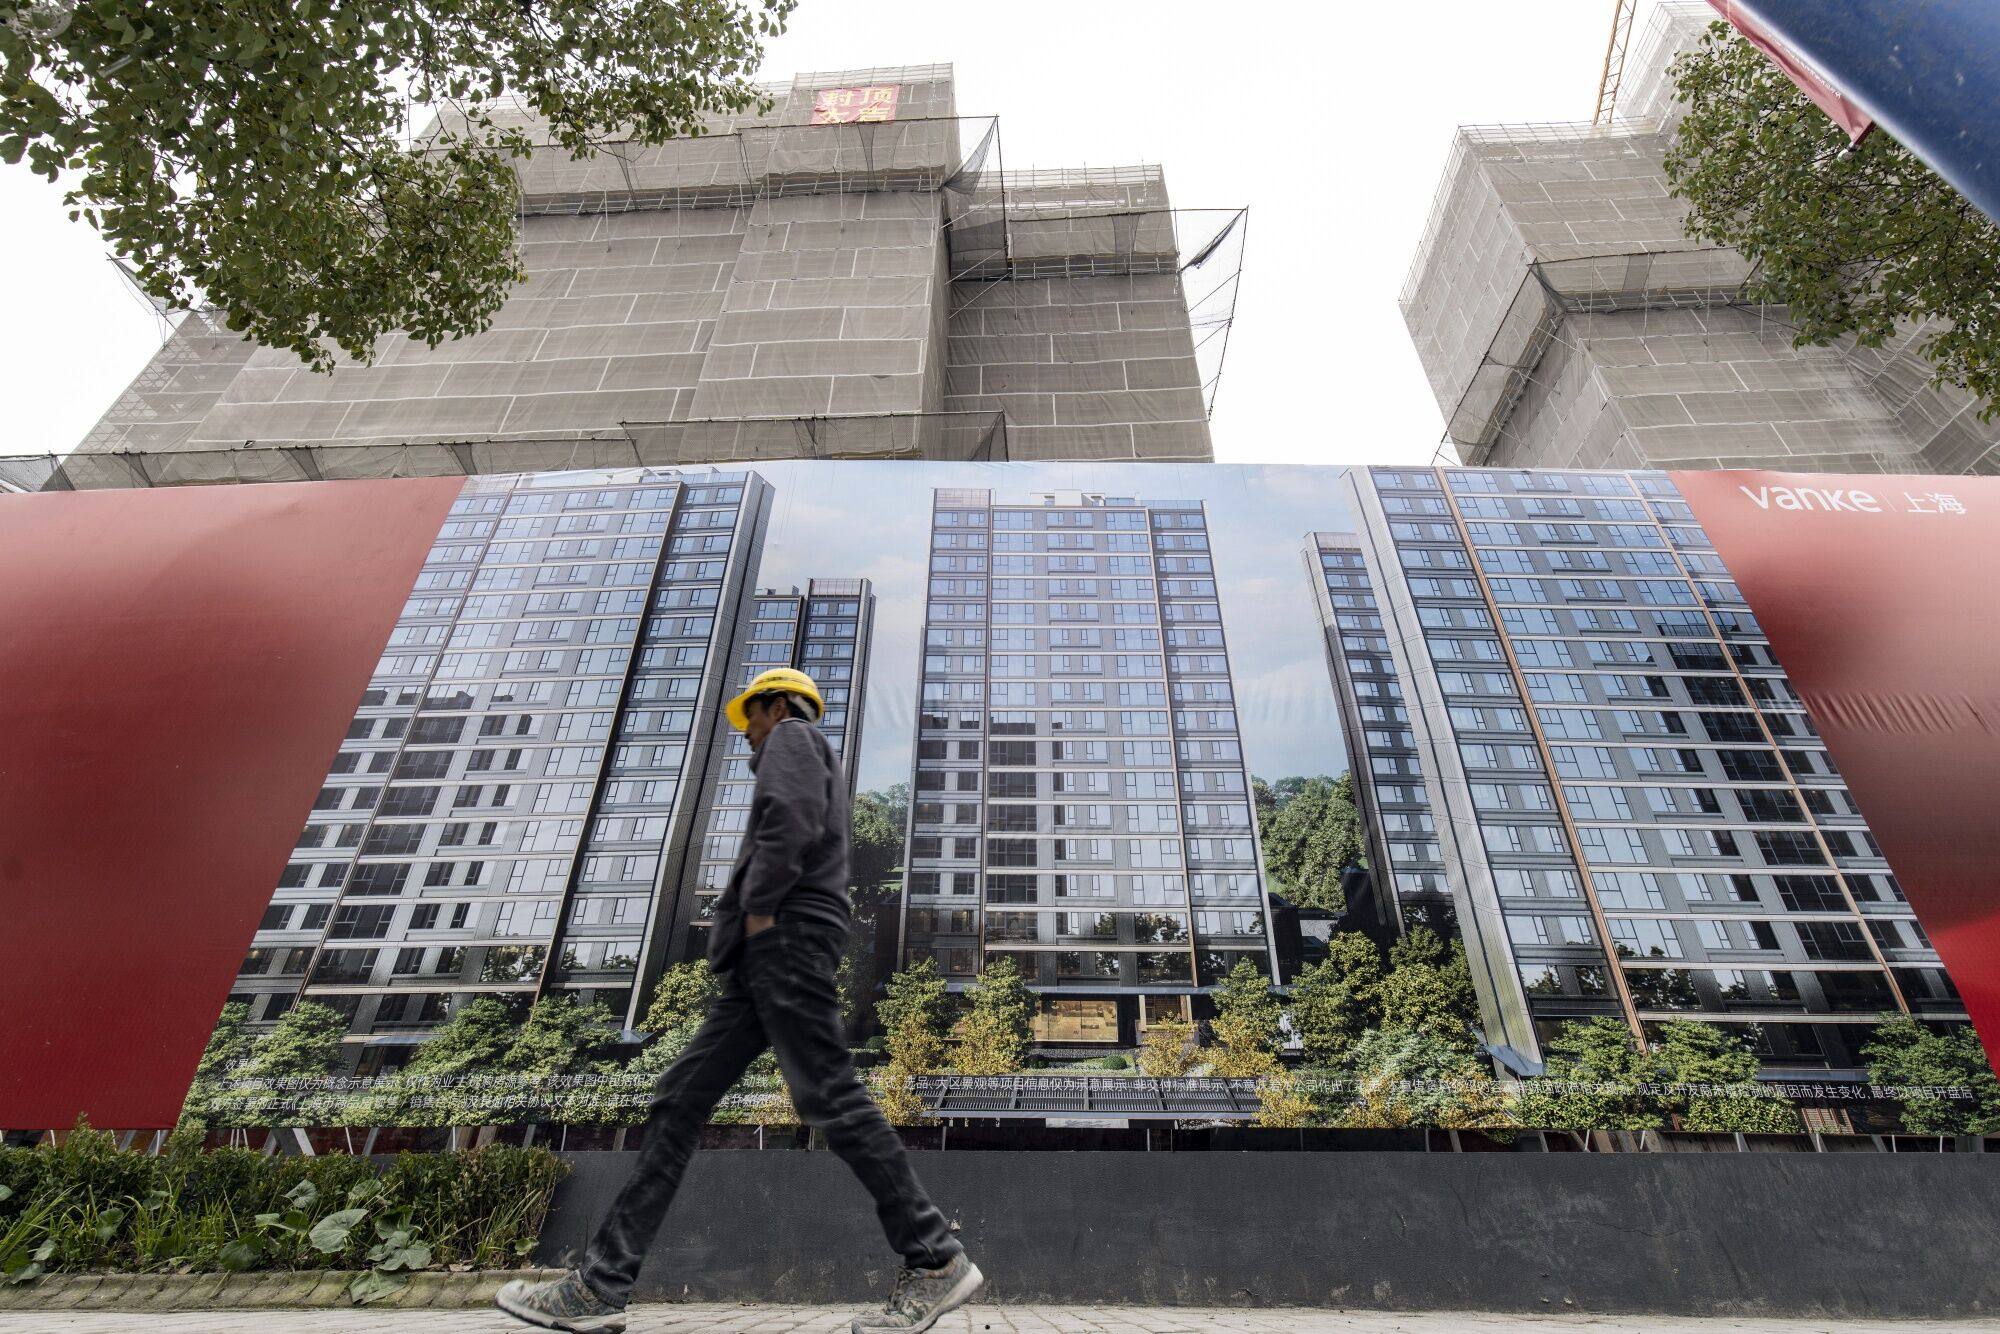 Shanghai has an inventory of new homes of about 8 million square metres, which could take more than a year to digest based on the current pace of sales. Photo: Bloomberg